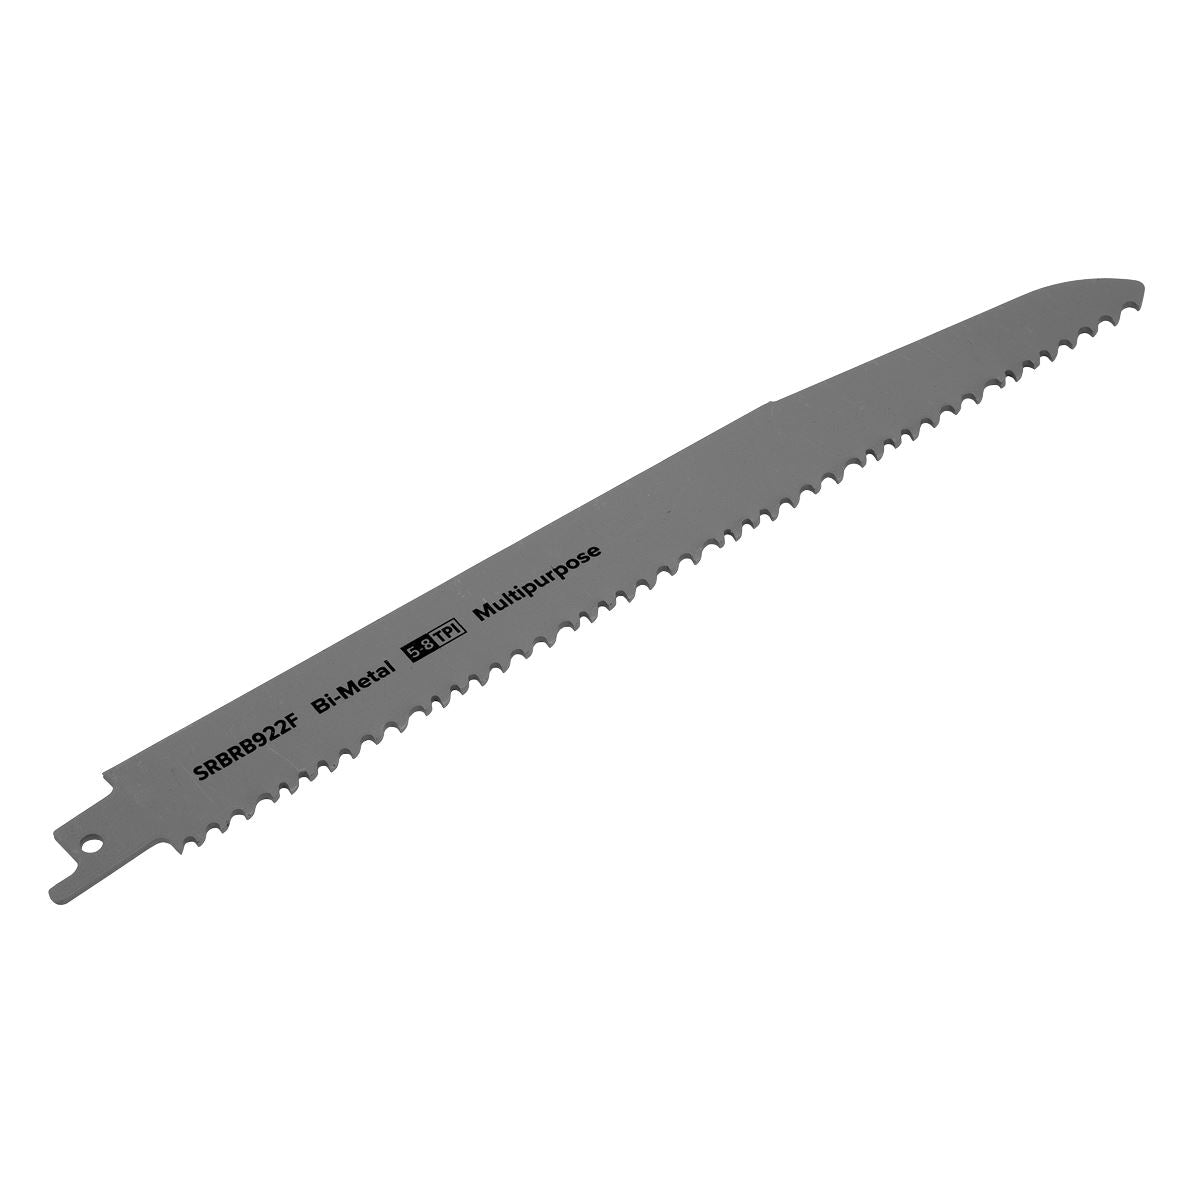 Sealey Reciprocating Saw Blade Multipurpose 230mm 5-8tpi - Pack of 5